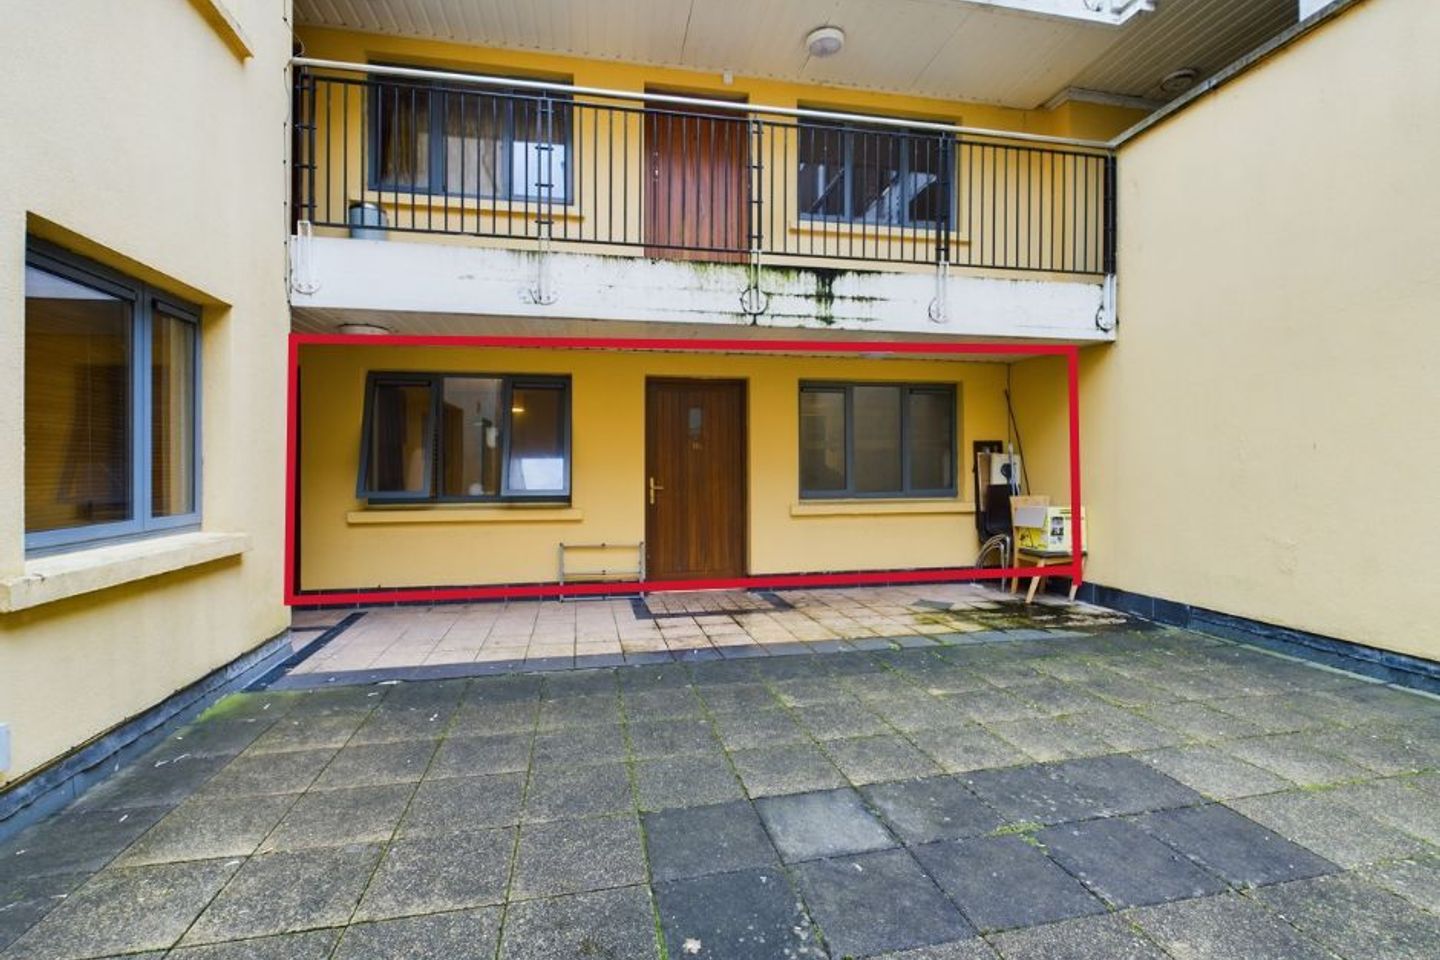 Apartment 16, O'Connell Court, Waterford City, Co. Waterford, X91DE09